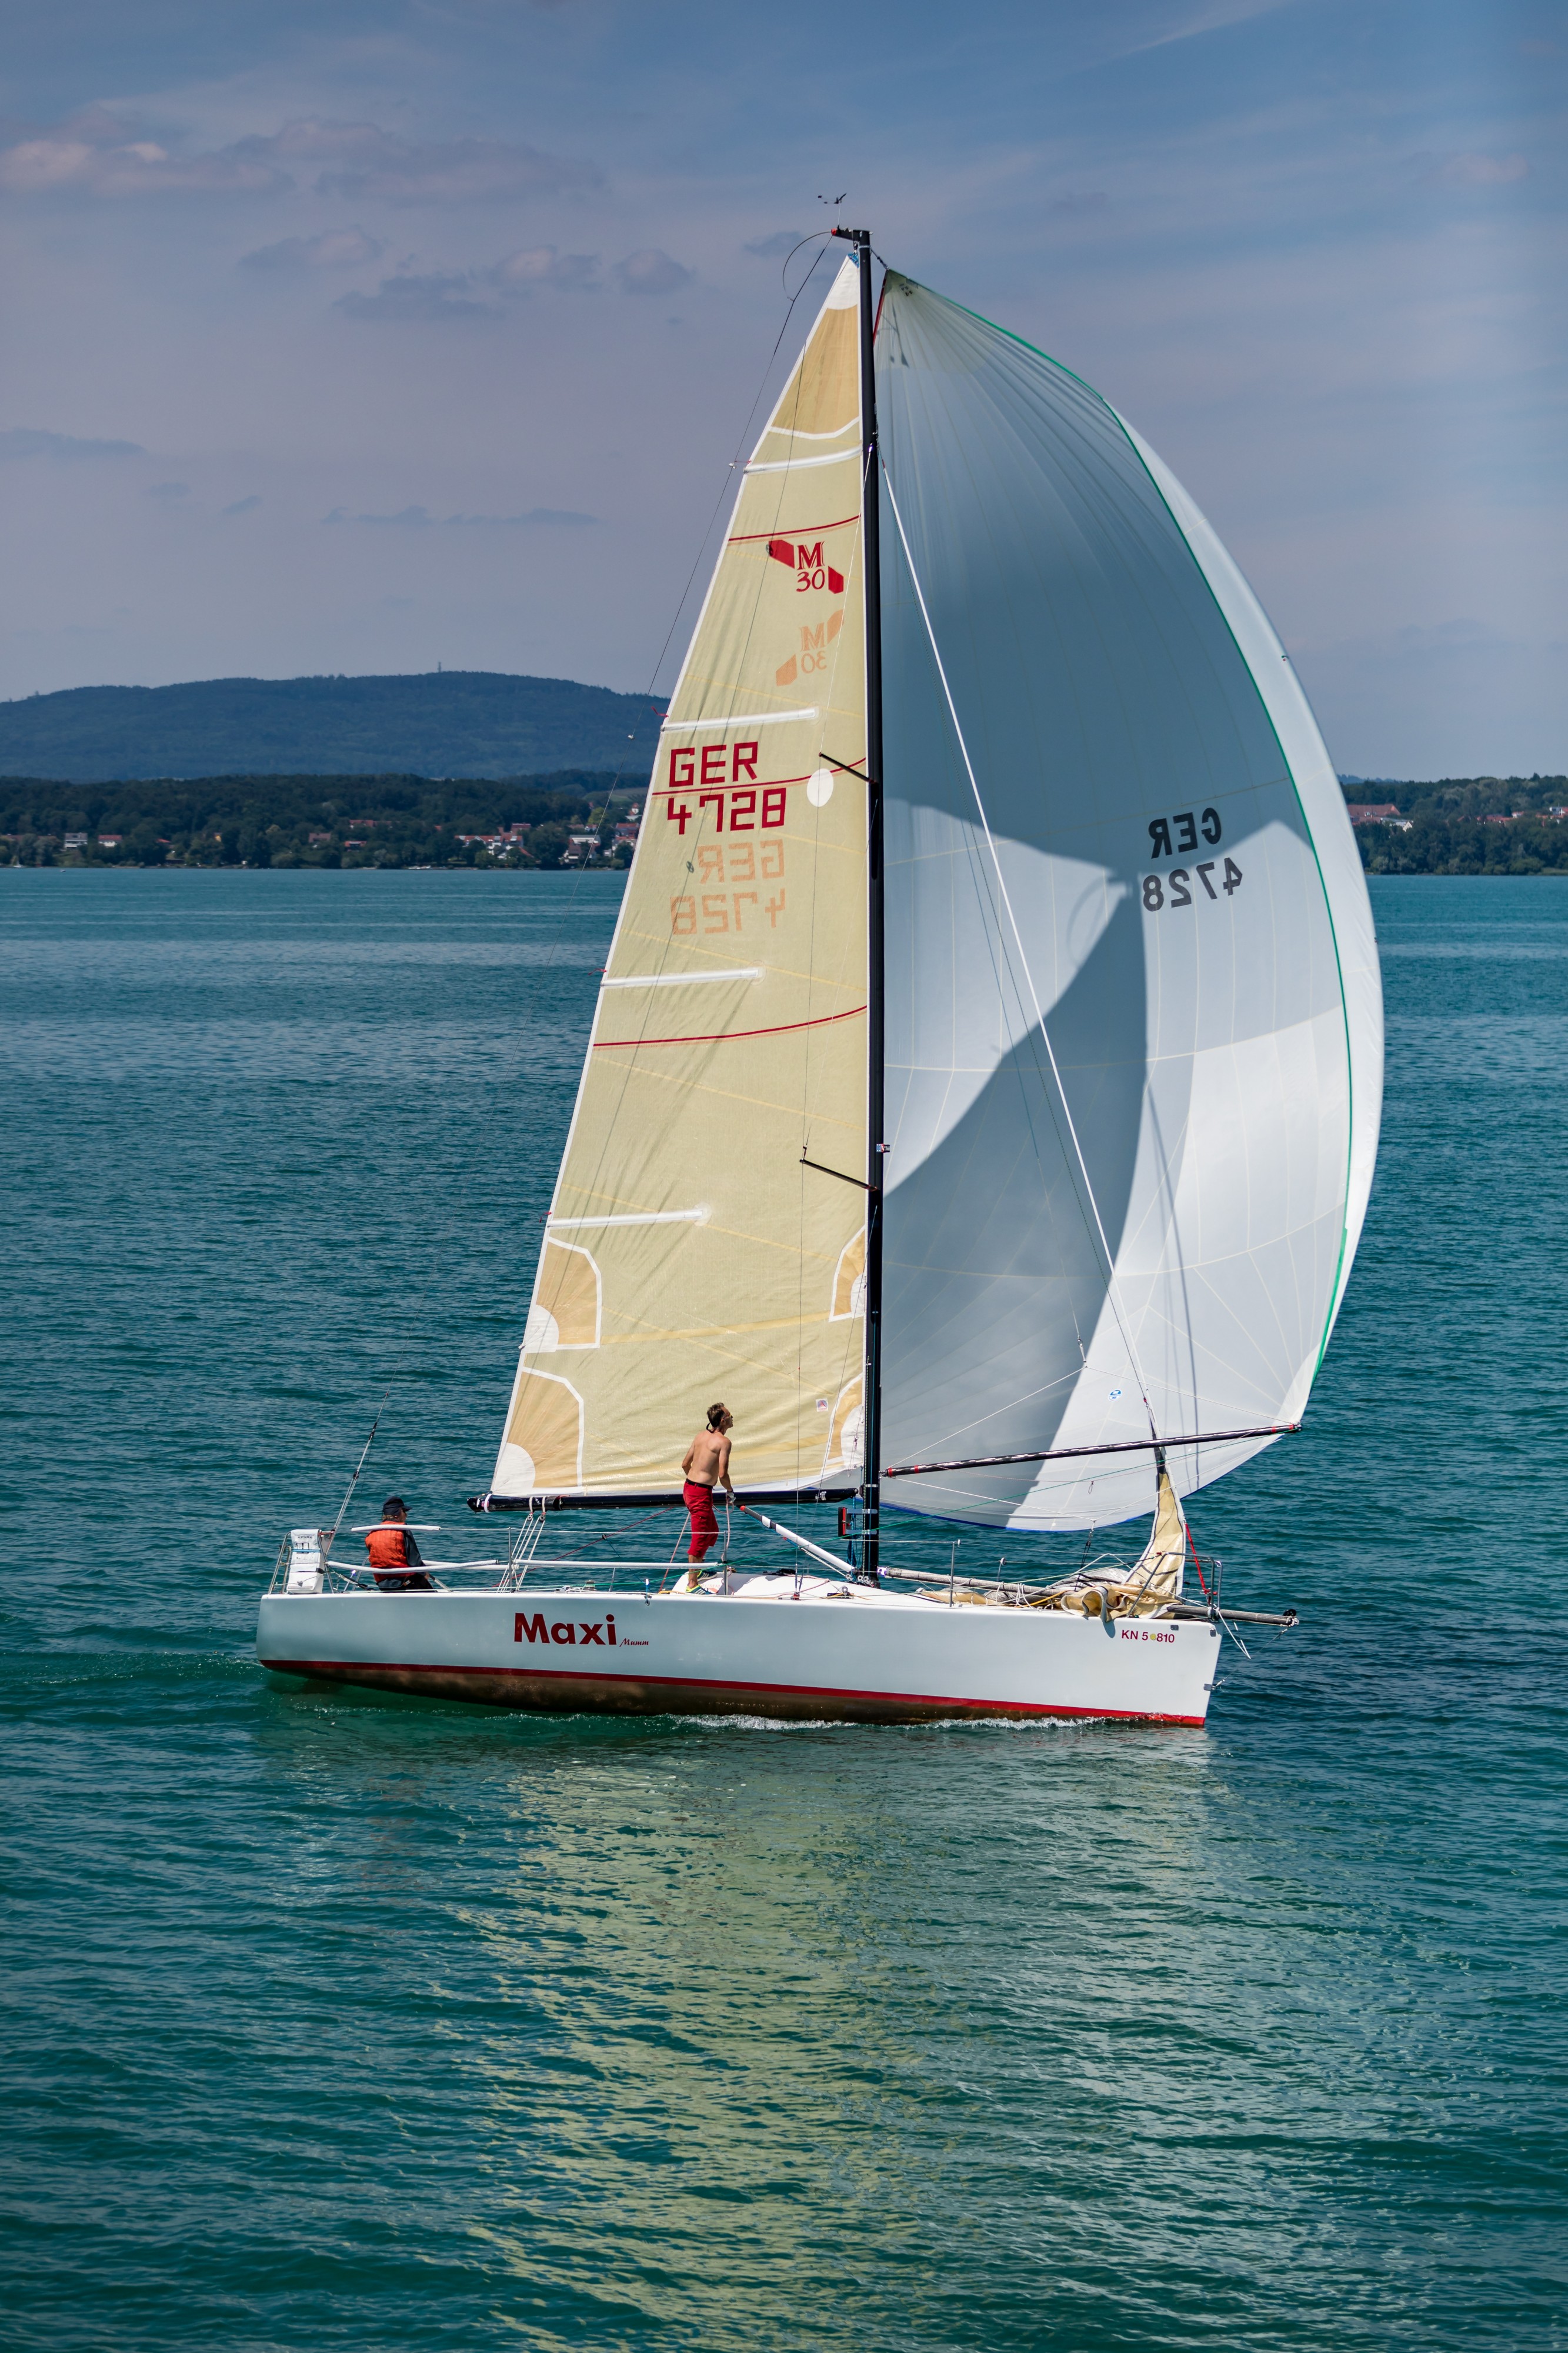 Sailing on Lake Constance (1X7A0002)